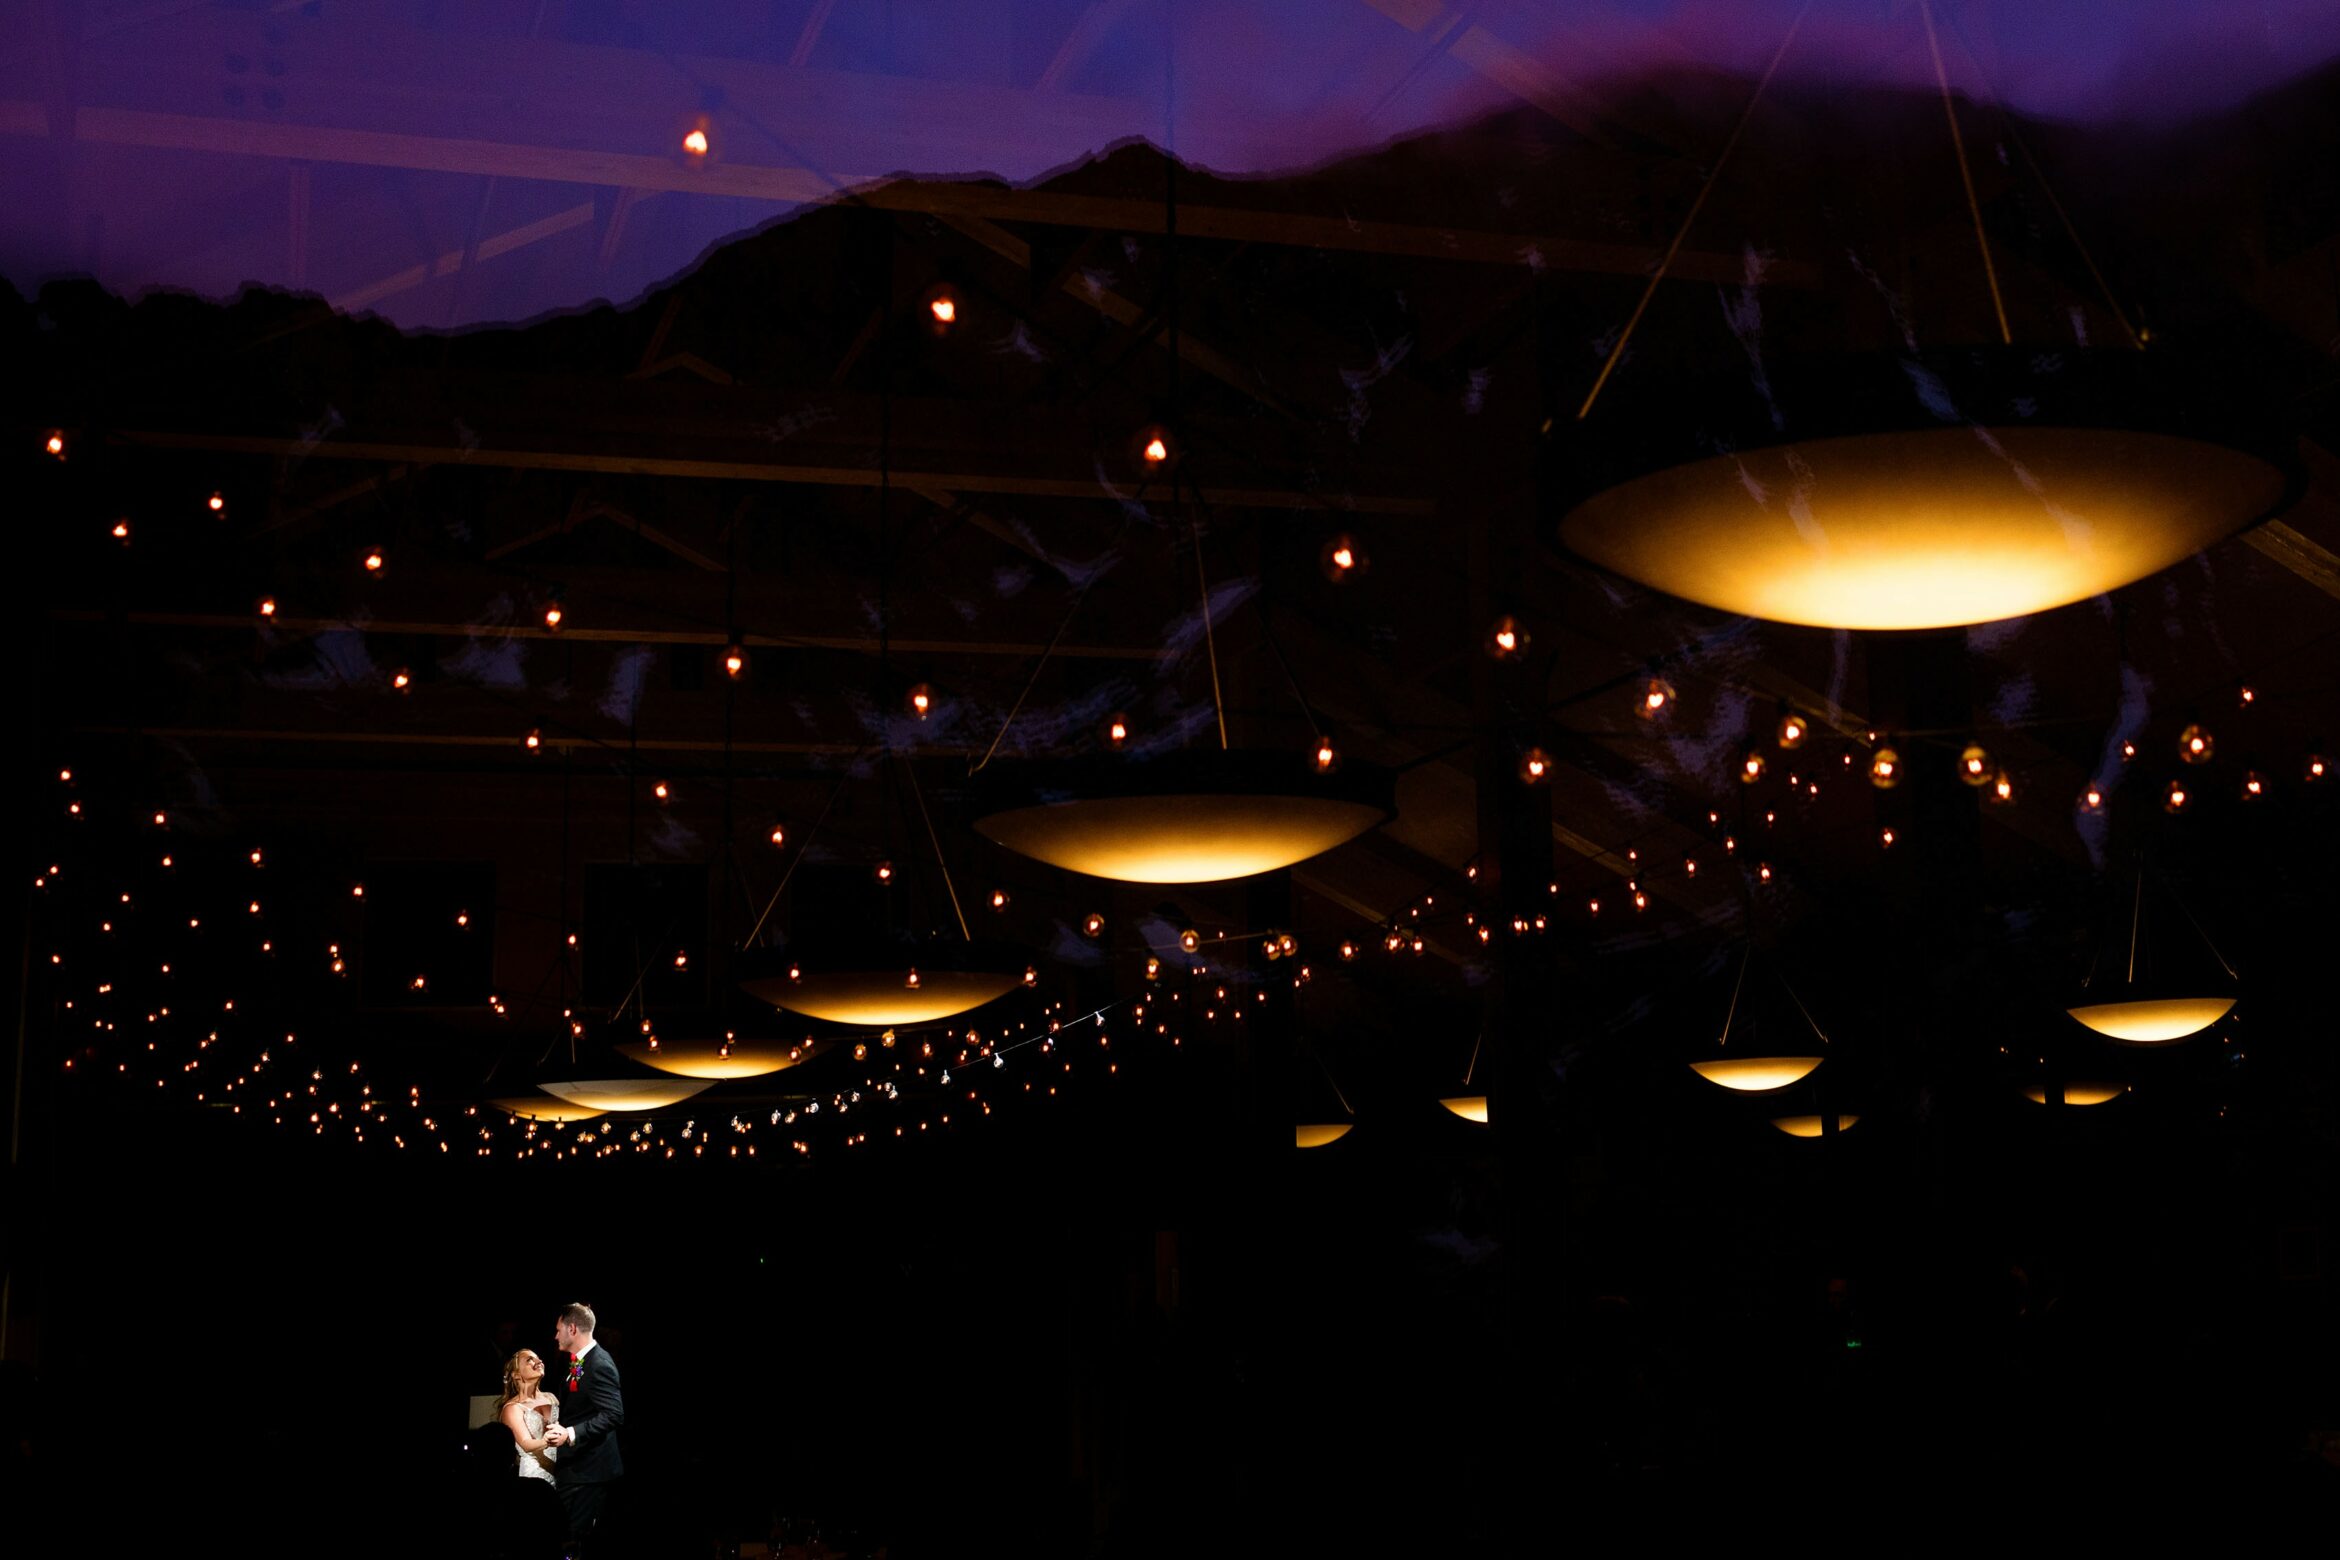 Diana and Eric share their first dance as the sun set is reflected in the window at Black Mountain Lodge